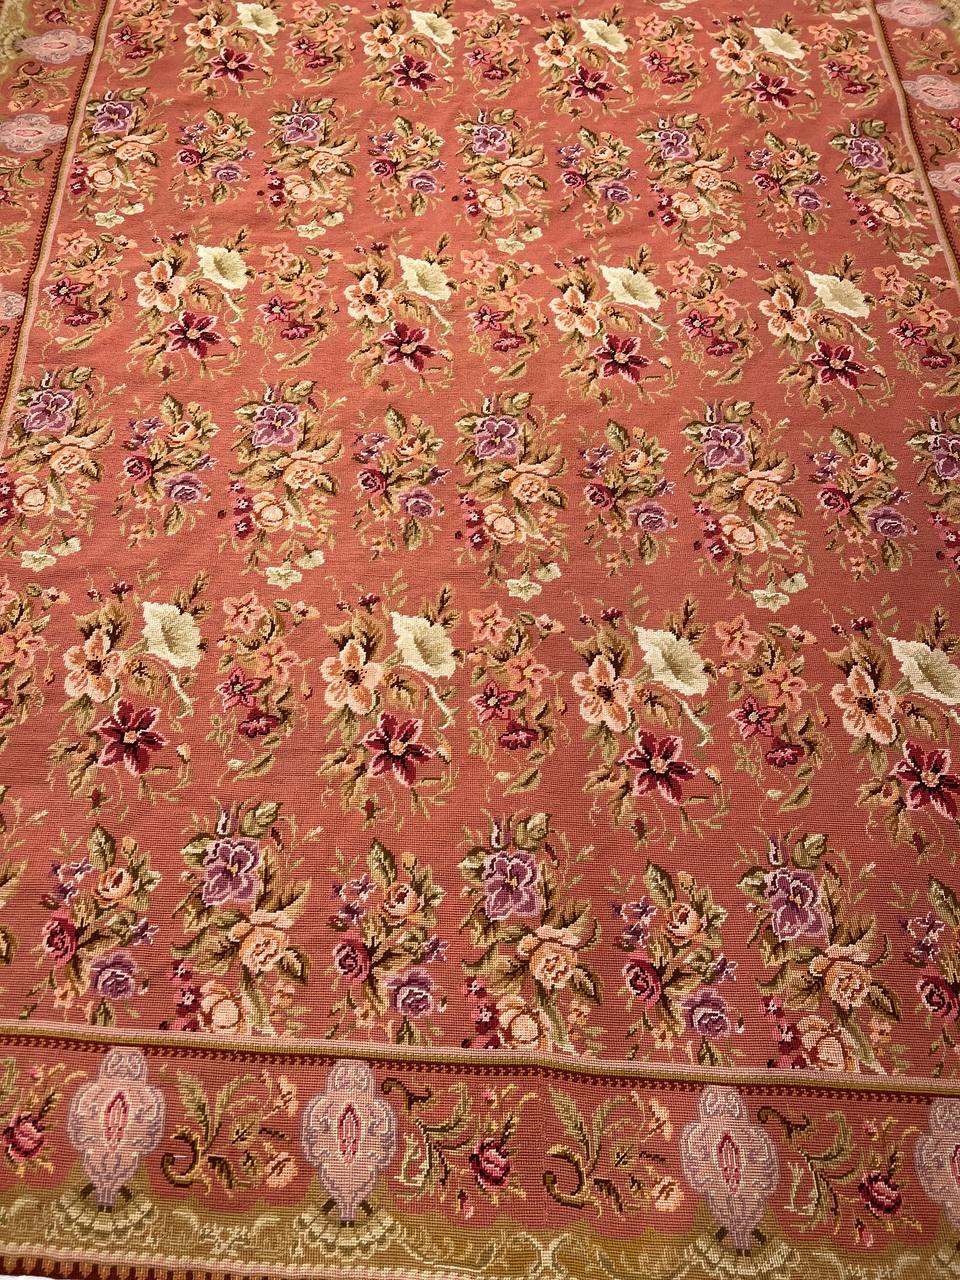 Canvello 1980s Vintage Needlepoint Flat Weave Rug - 6'7'' X 9'4''